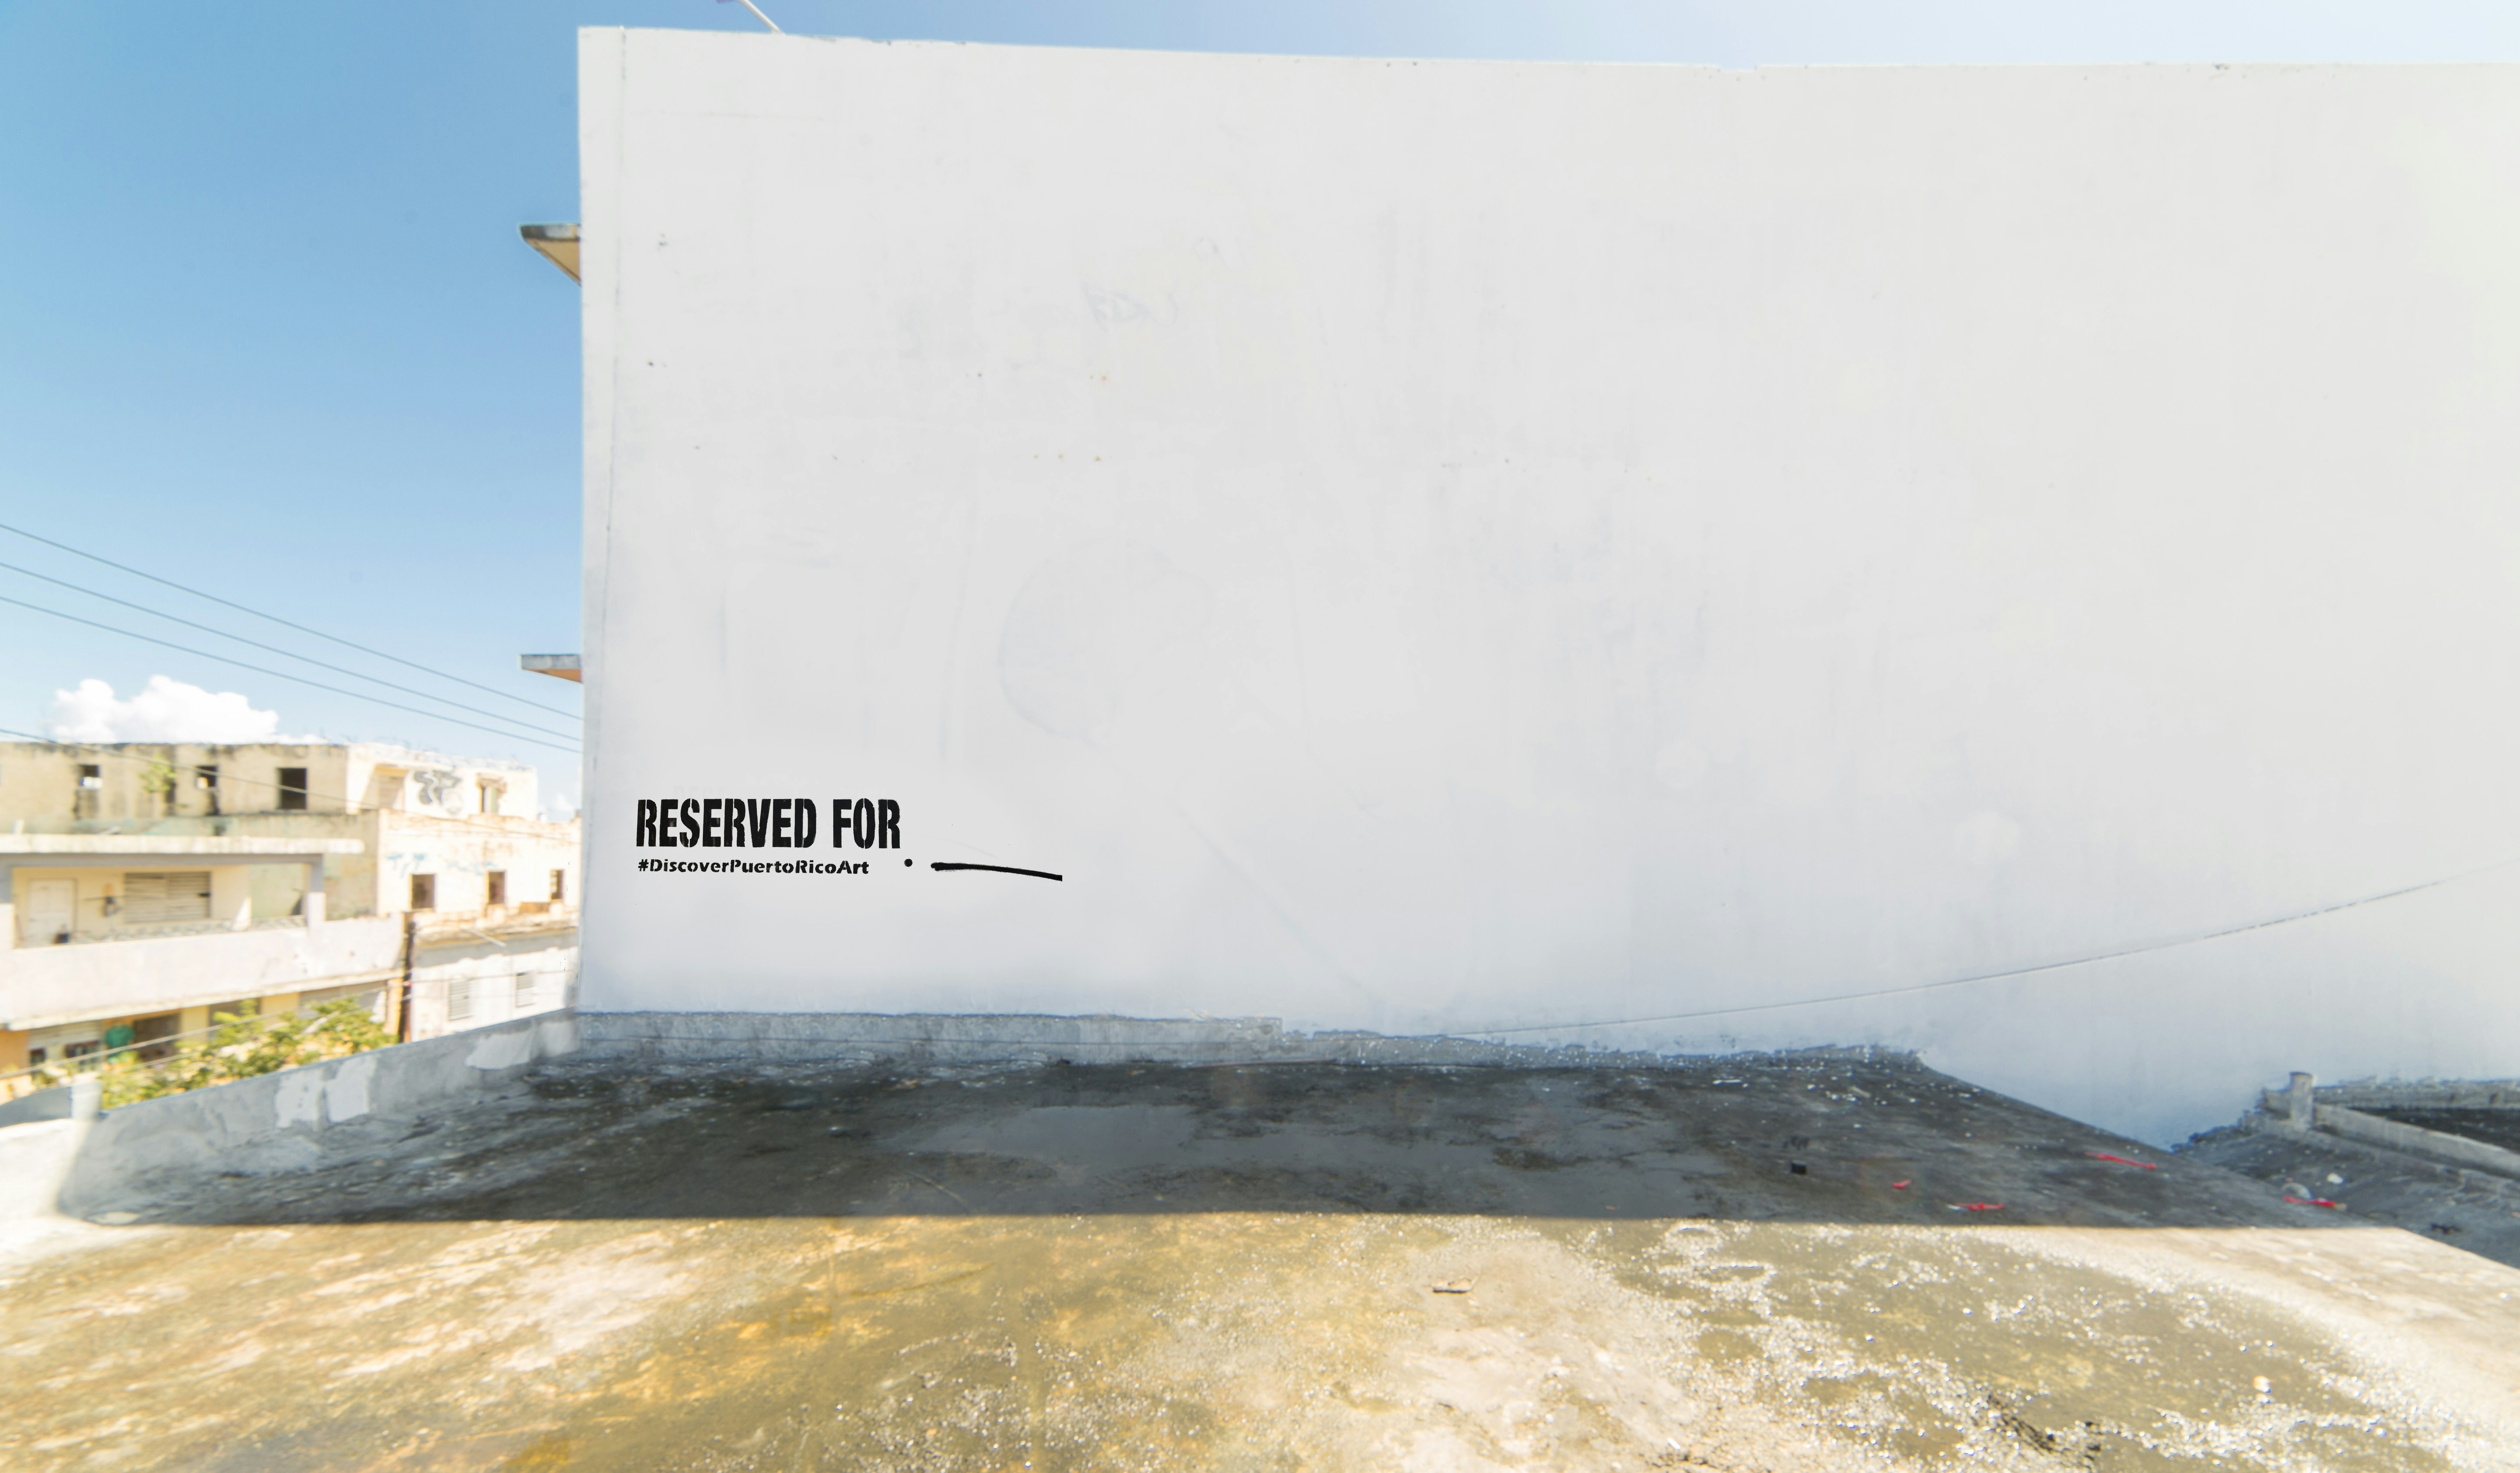 A blank white wall on a street in Puerto Rico